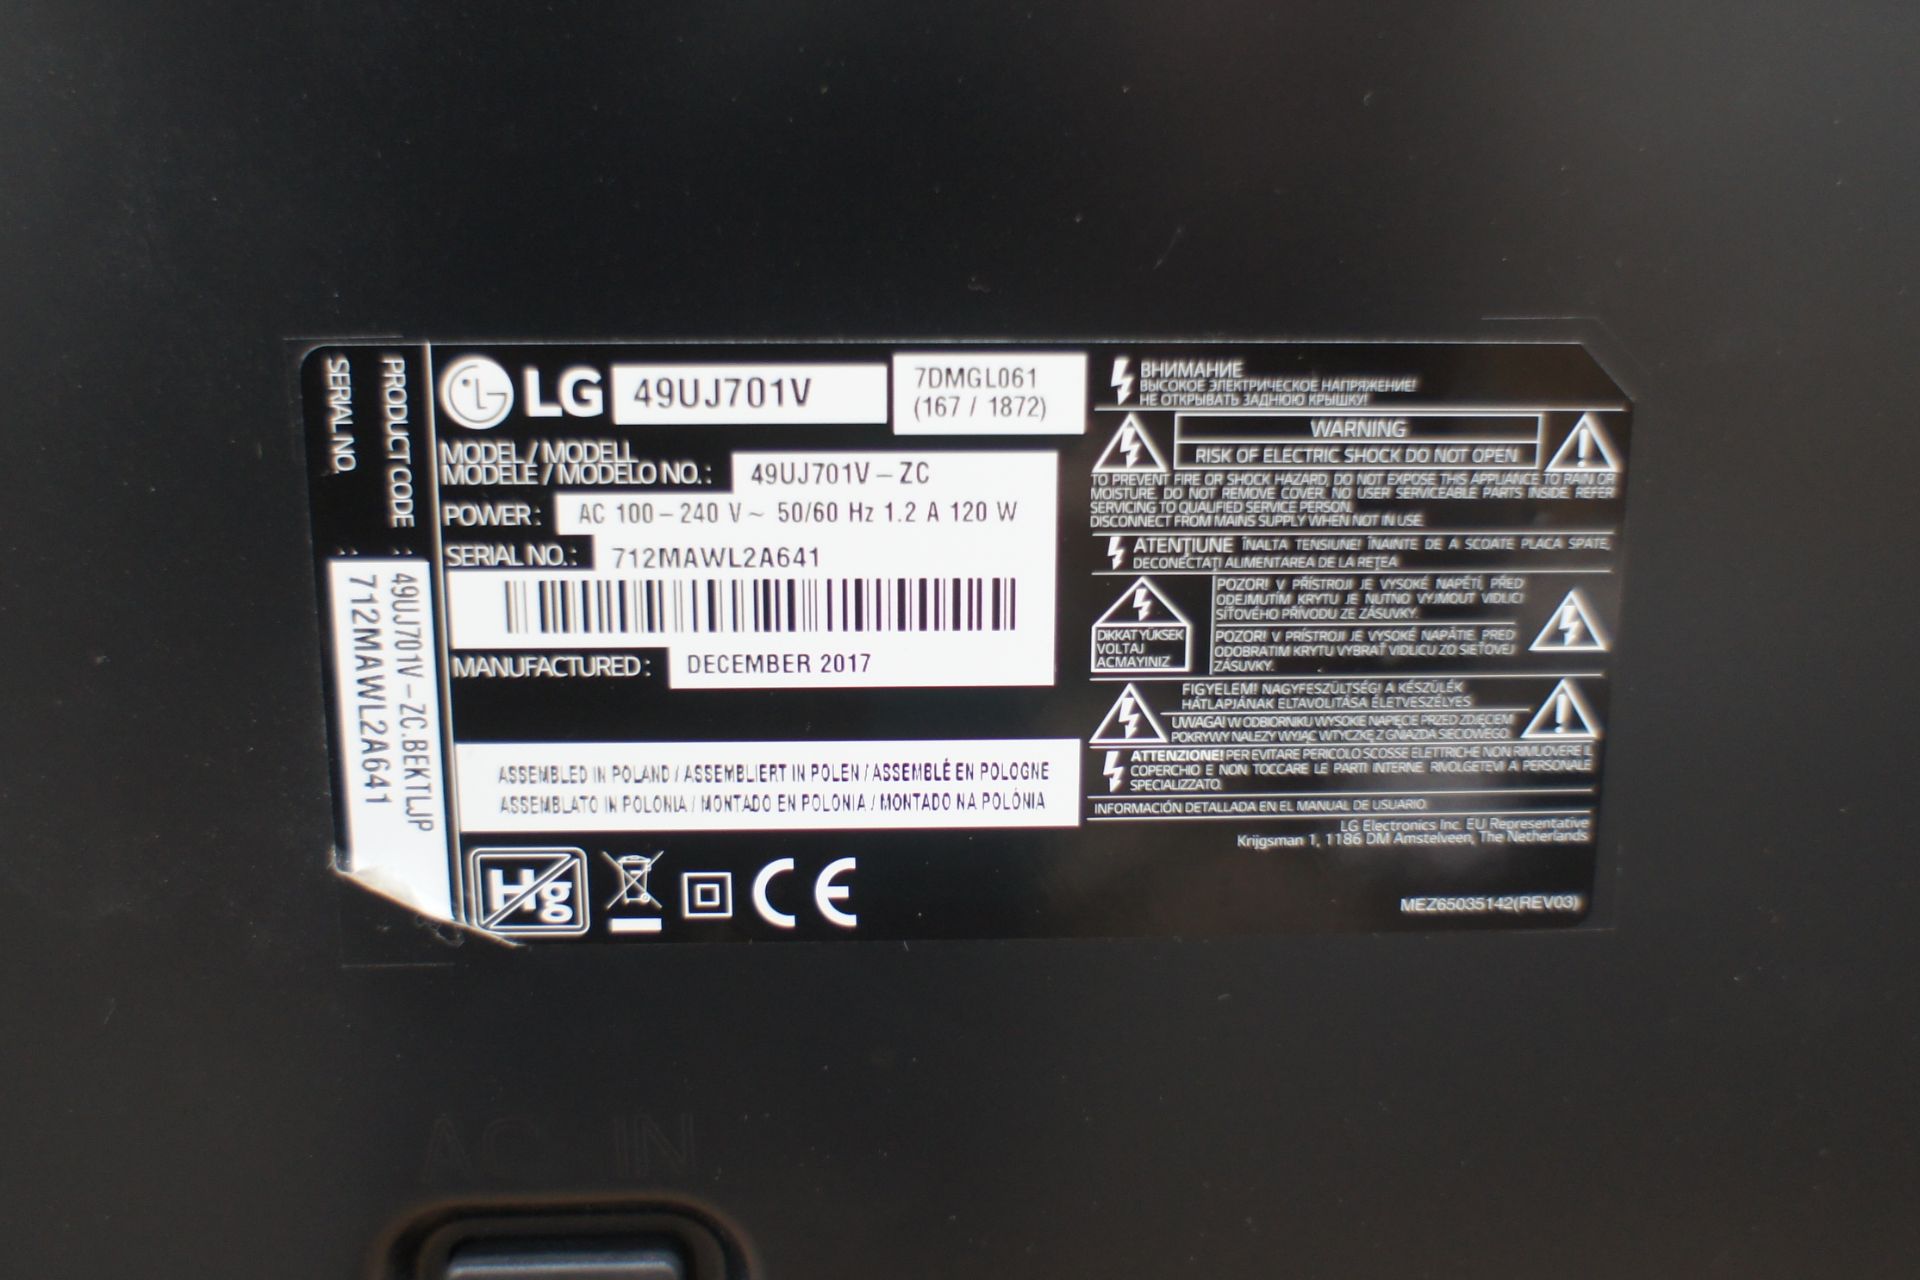 LG49UJ701V 49in LCD TV, Serial Number 712MAWL2A641 Year 2017 - Image 2 of 4